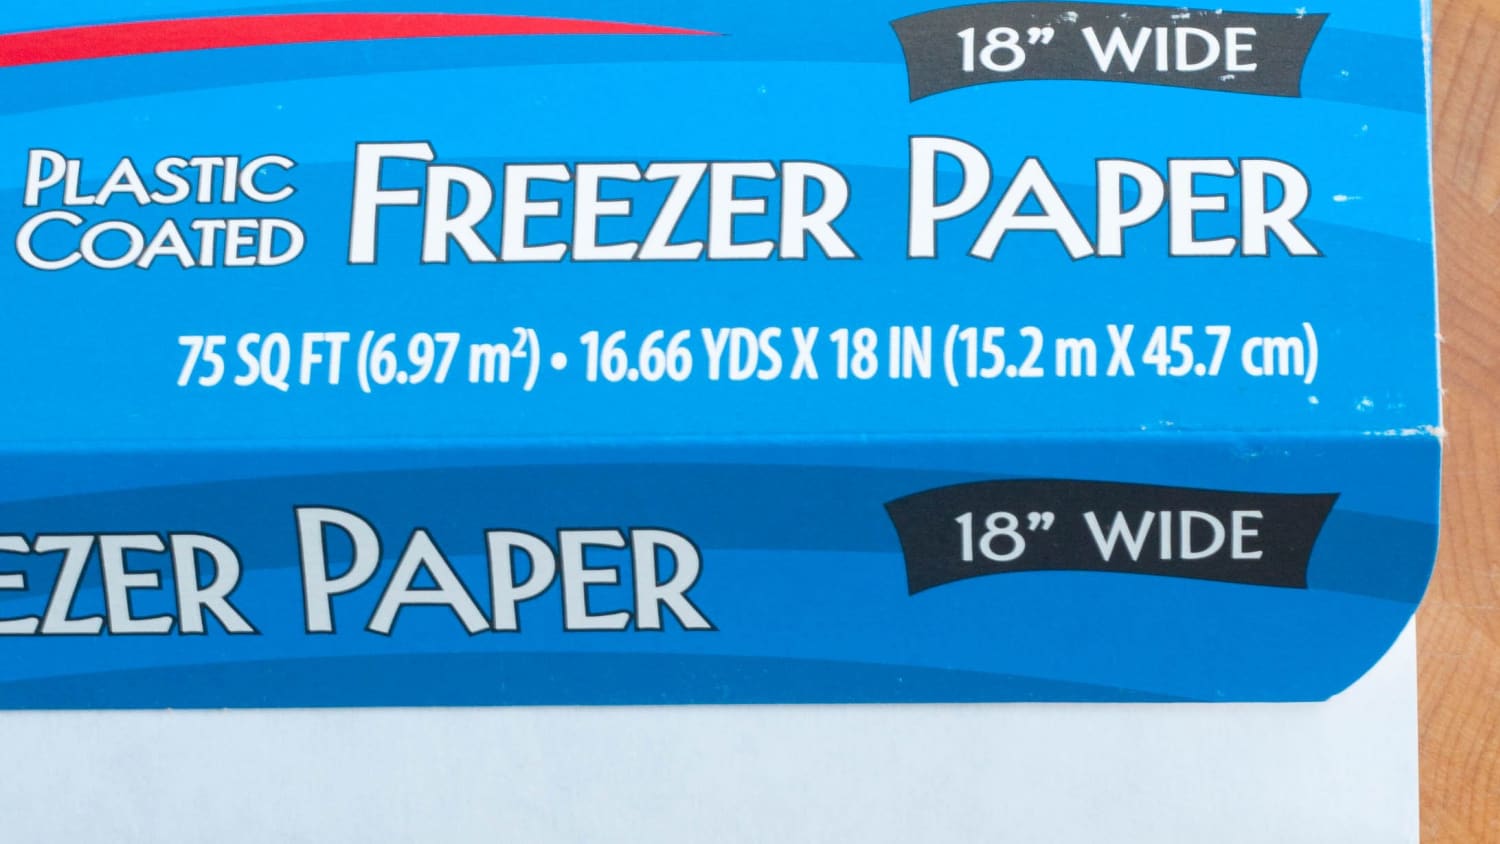 What's Freezer Paper and How's It Different from Wax Paper & Parchment?